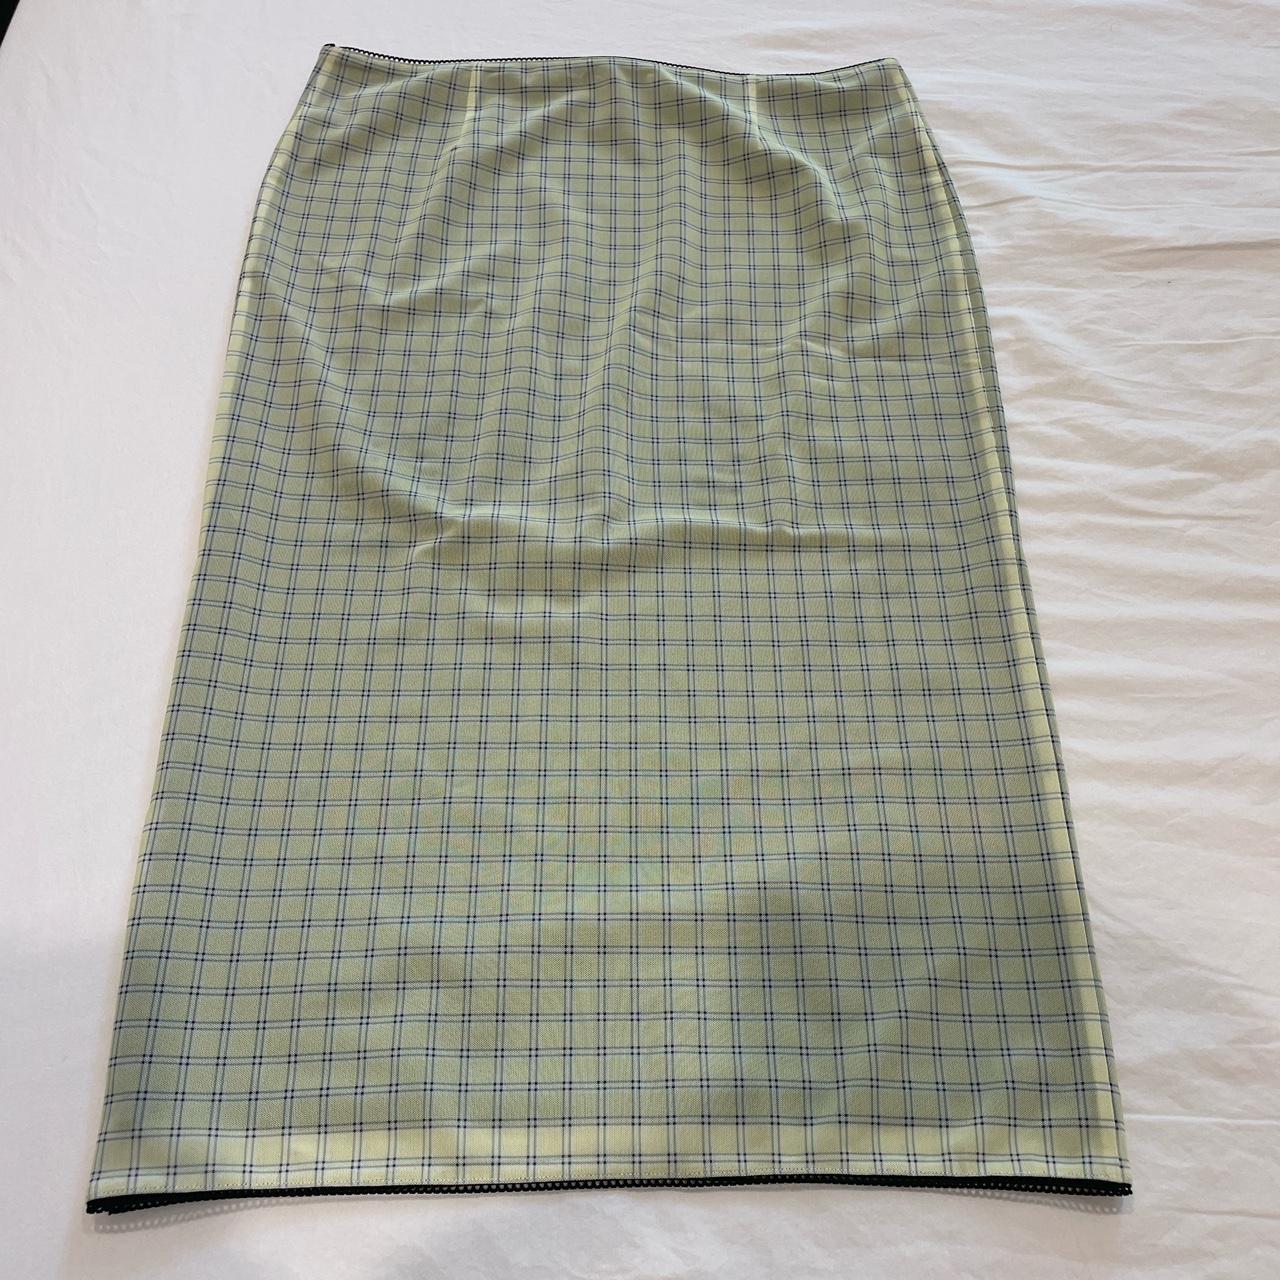 Product Image 1 - Miaou skirt. Fits a size